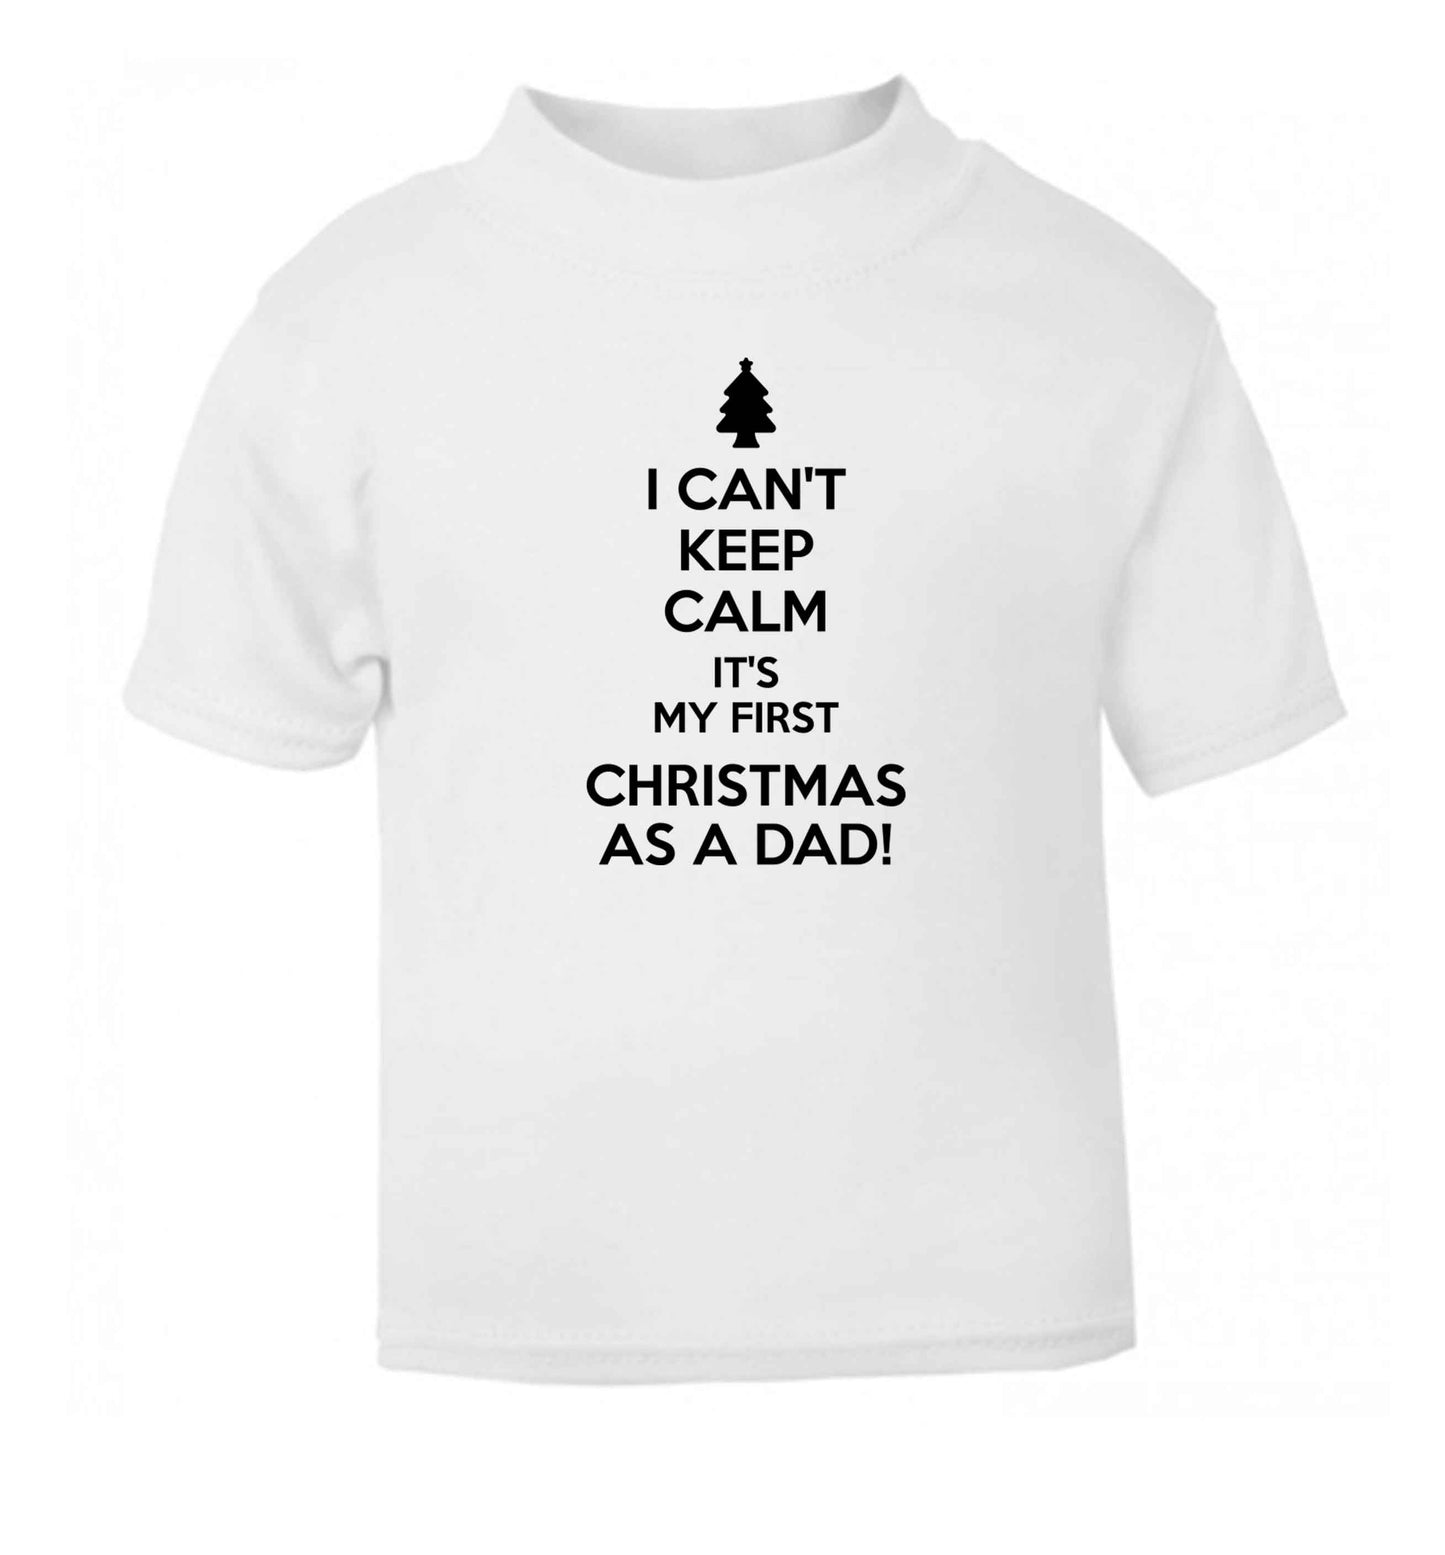 I can't keep calm it's my first Christmas as a dad white Baby Toddler Tshirt 2 Years